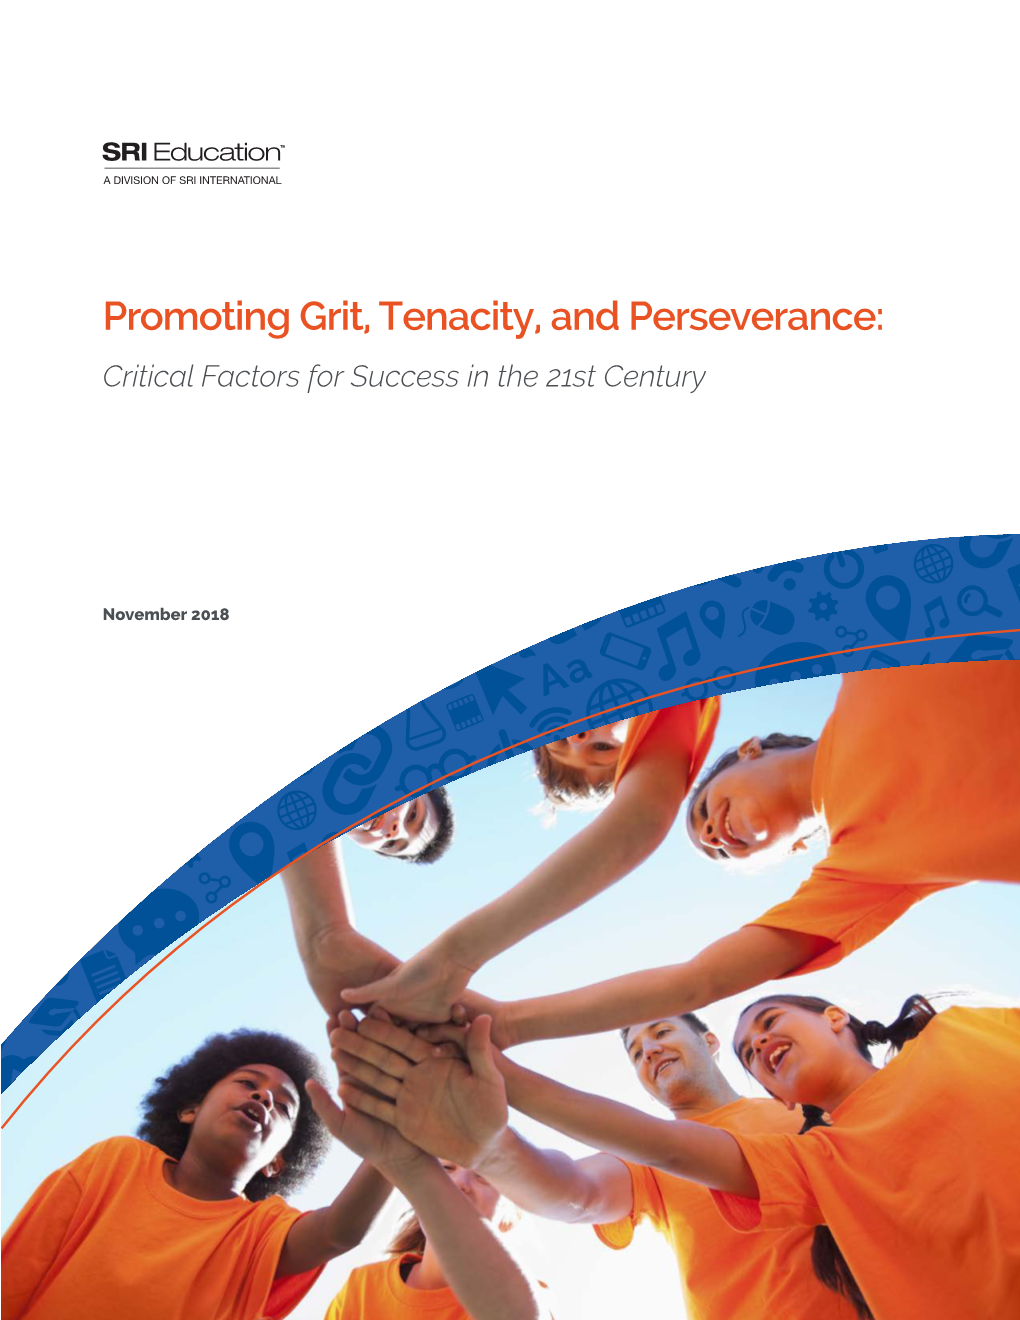 Promoting Grit, Tenacity, and Perseverance: Critical Factors for Success in the 21St Century